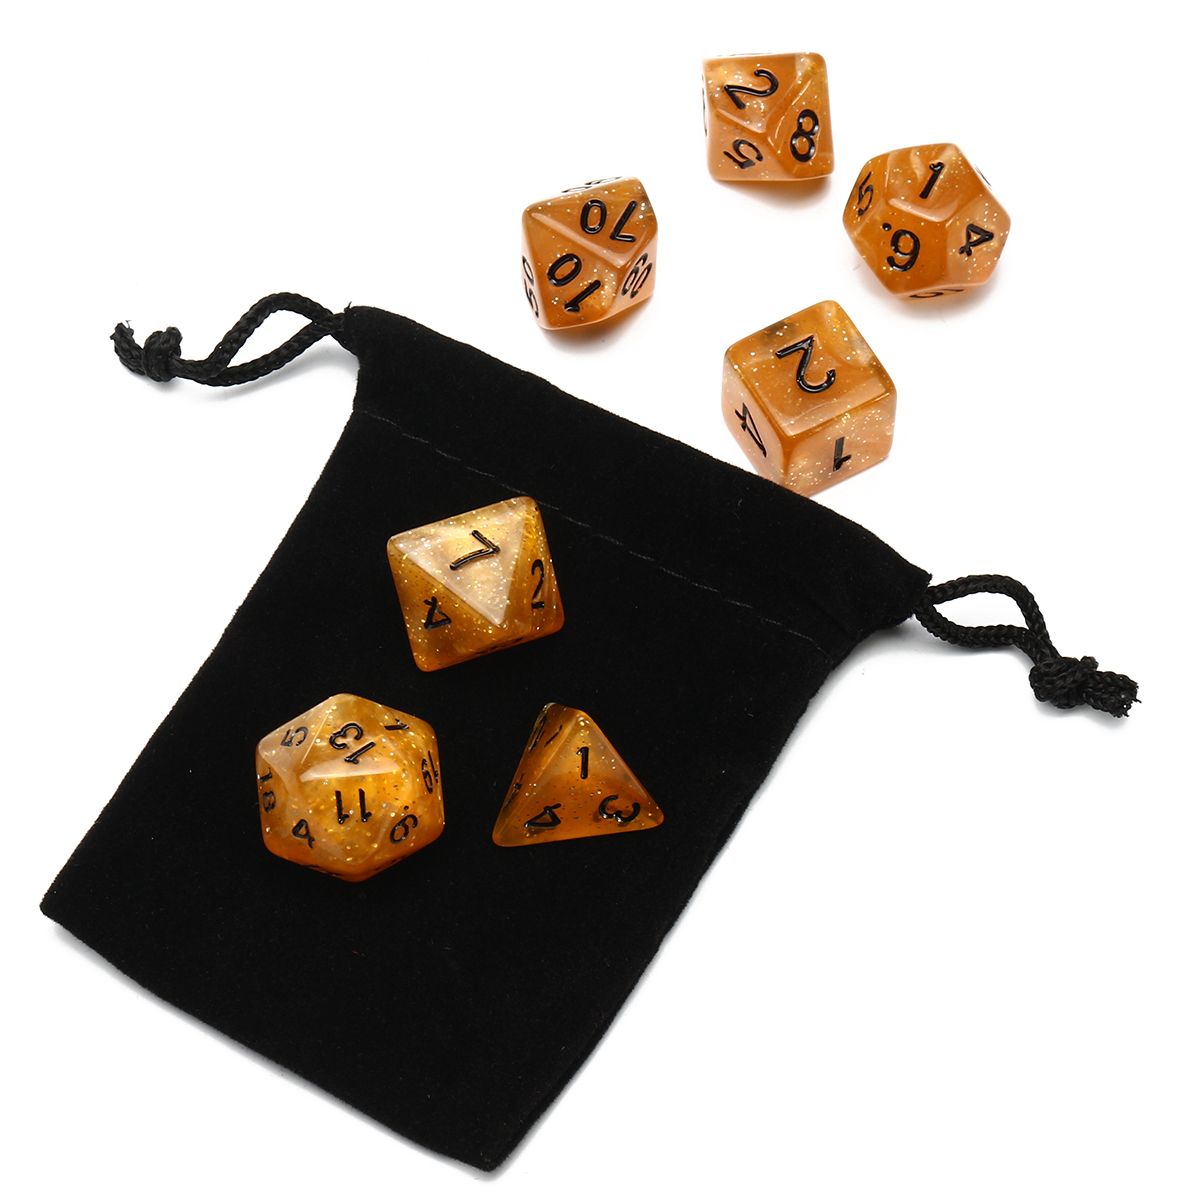 7-Piece-Polyhedral-Dice-Set-Multisided-Dice-With-Dice-Bag-RPG-Role-Playing-Games-Dices-Gadget-1267393